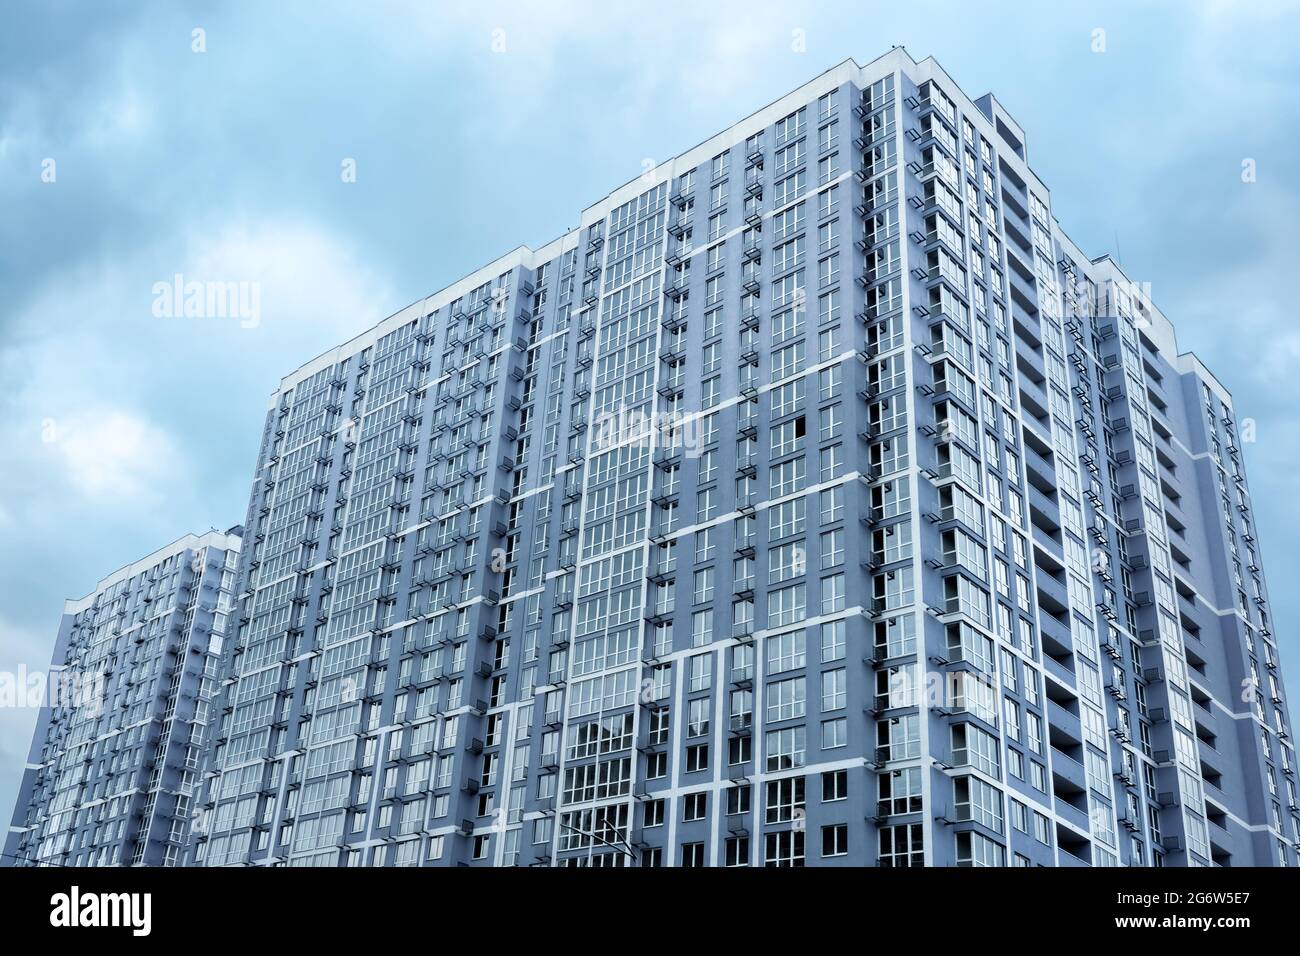 Multistory house. New apartment facade in big building modern flat apartment complex. New house condominium building real estate modern residential Stock Photo